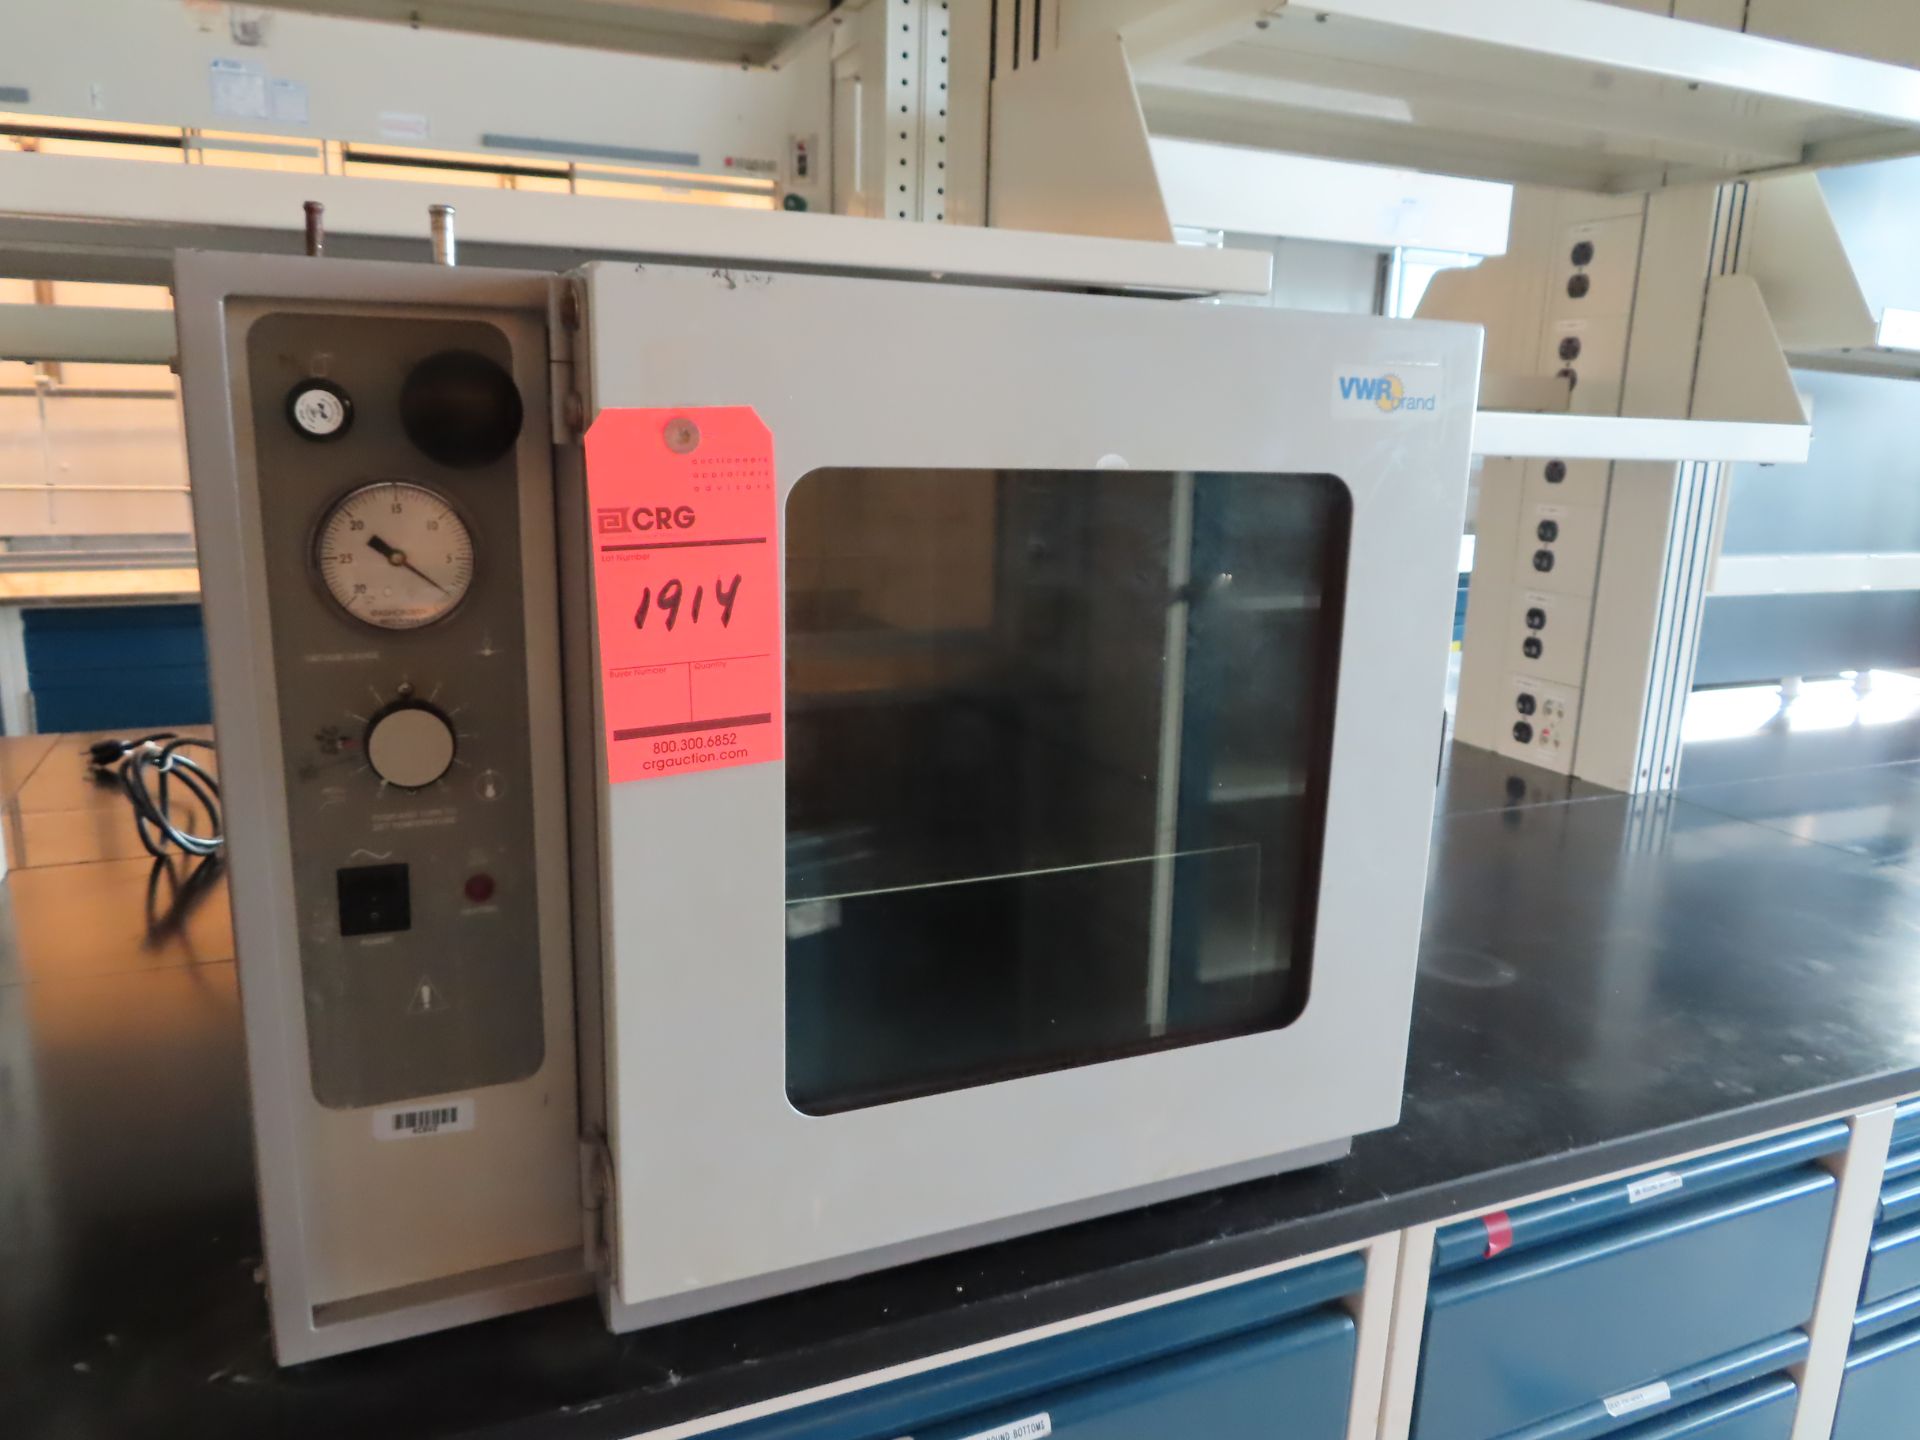 VWR 1430 lab oven, s/n 080199, 12" X 12" X 20" deep, located C wing 4th floor, room 464A